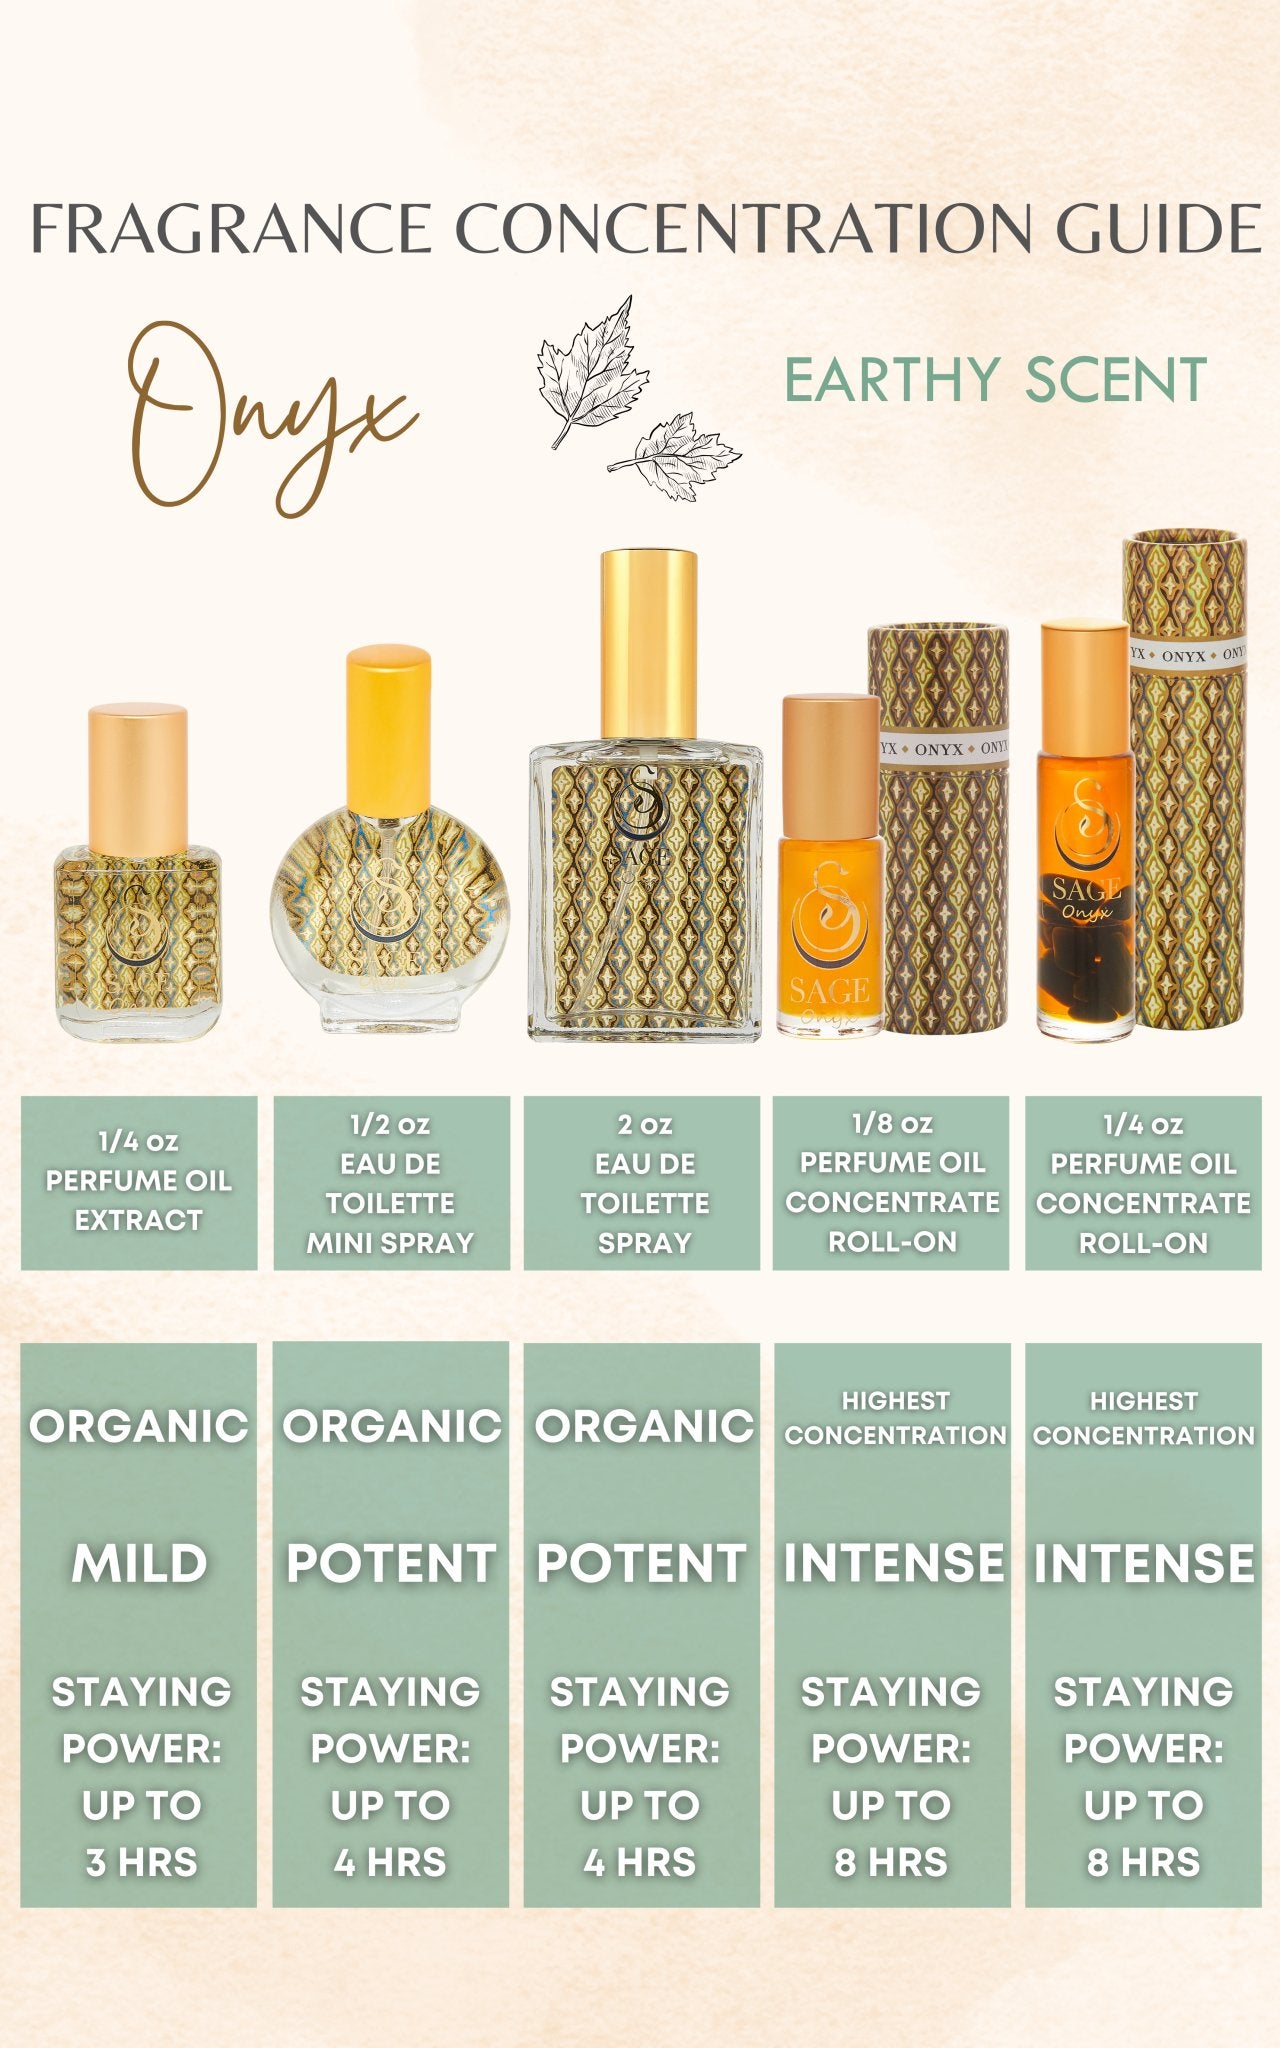 INDULGE ~ ONYX Perfume Oil Concentrate Roll-On and Organic Eau de Toilette Gift Set by Sage - The Sage Lifestyle